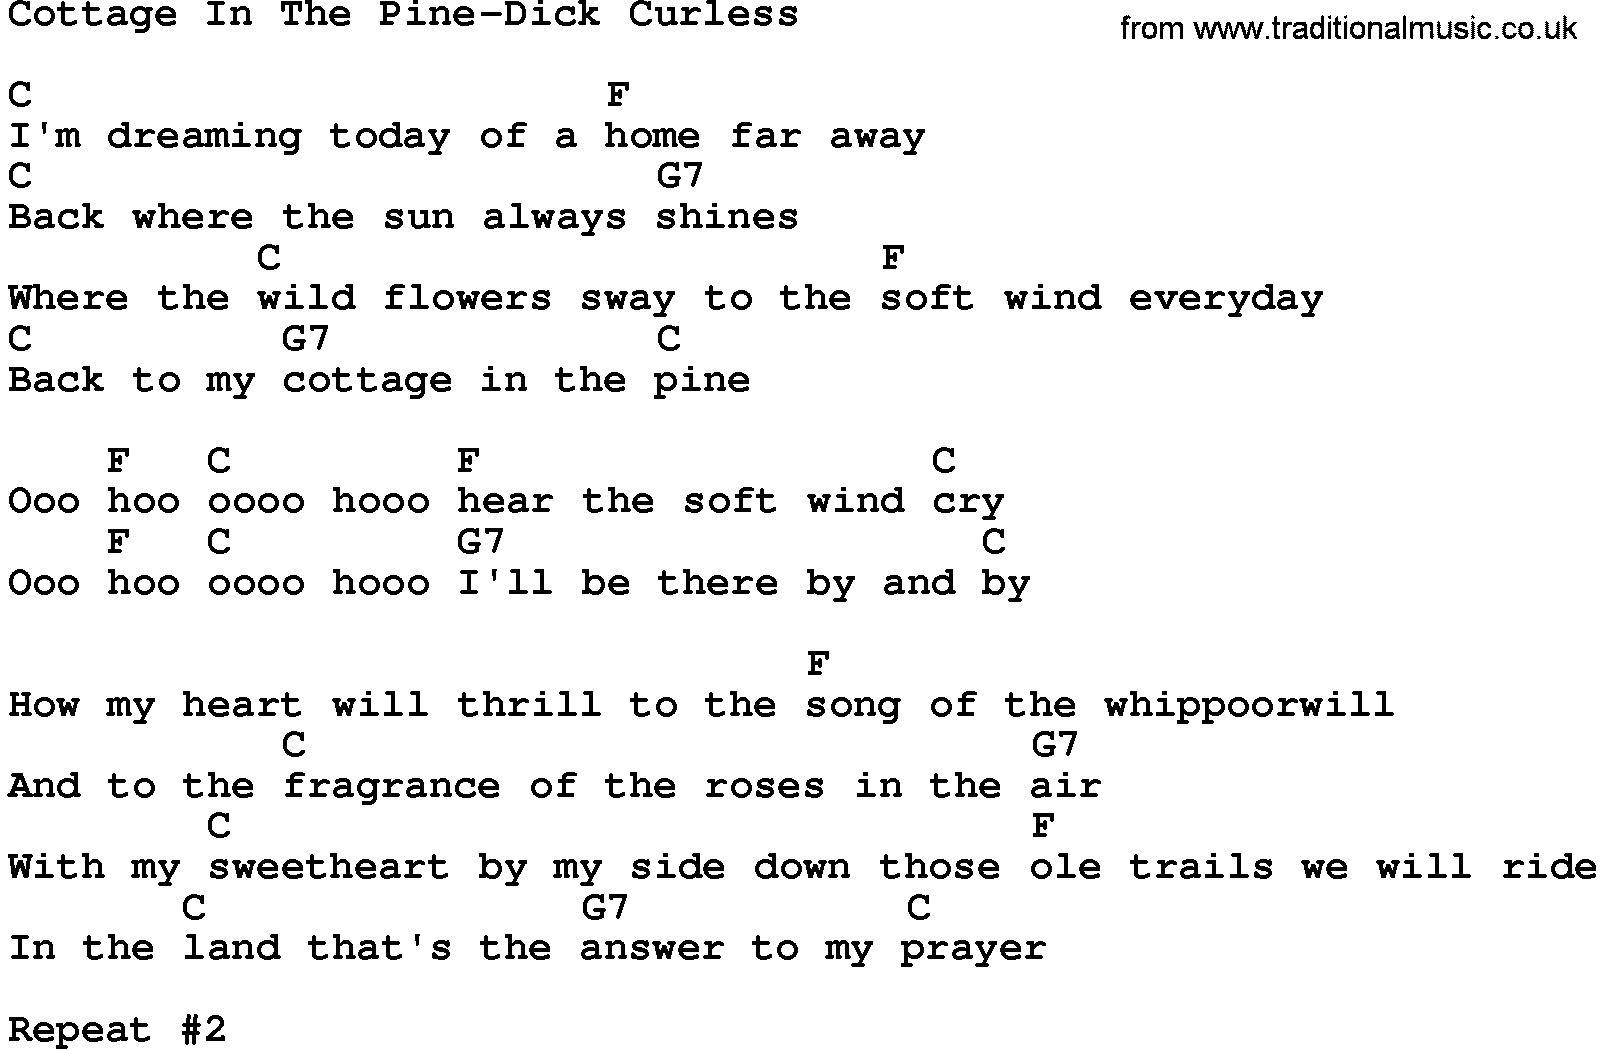 Country music song: Cottage In The Pine-Dick Curless lyrics and chords